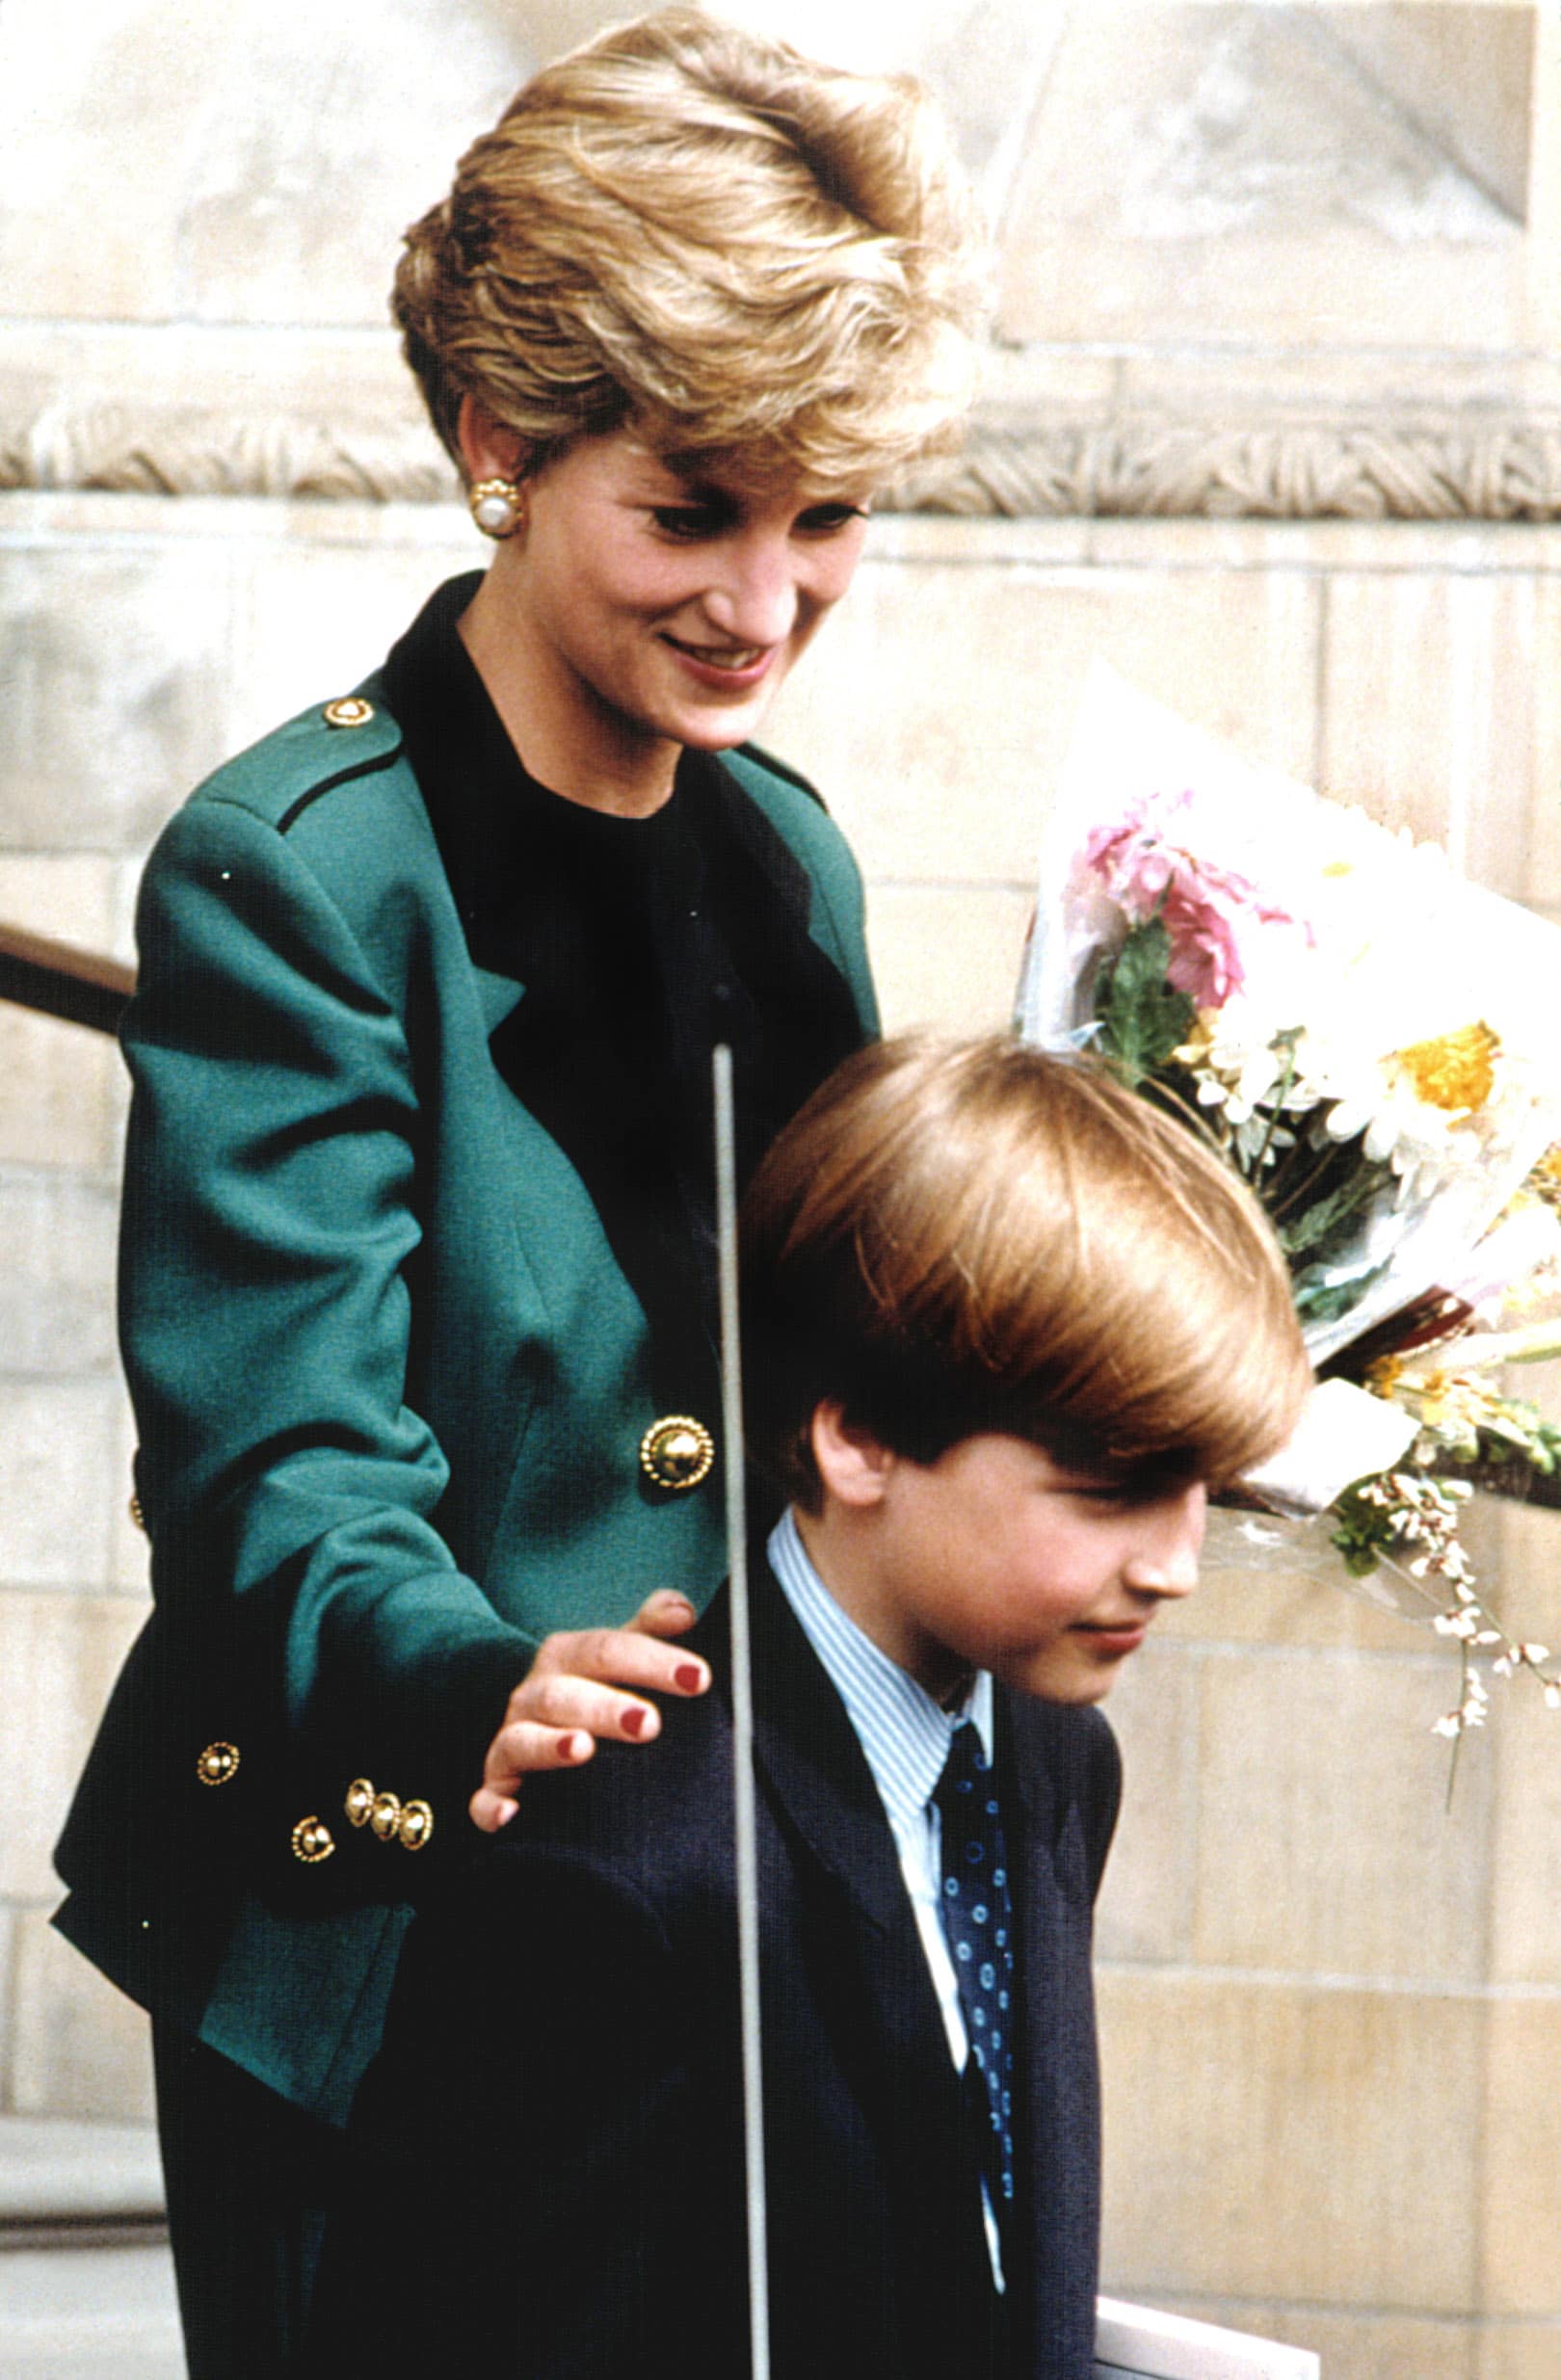 PRINCESS DIANA and son PRINCE WILLIAM, at the National Museum in London, 04/13/92